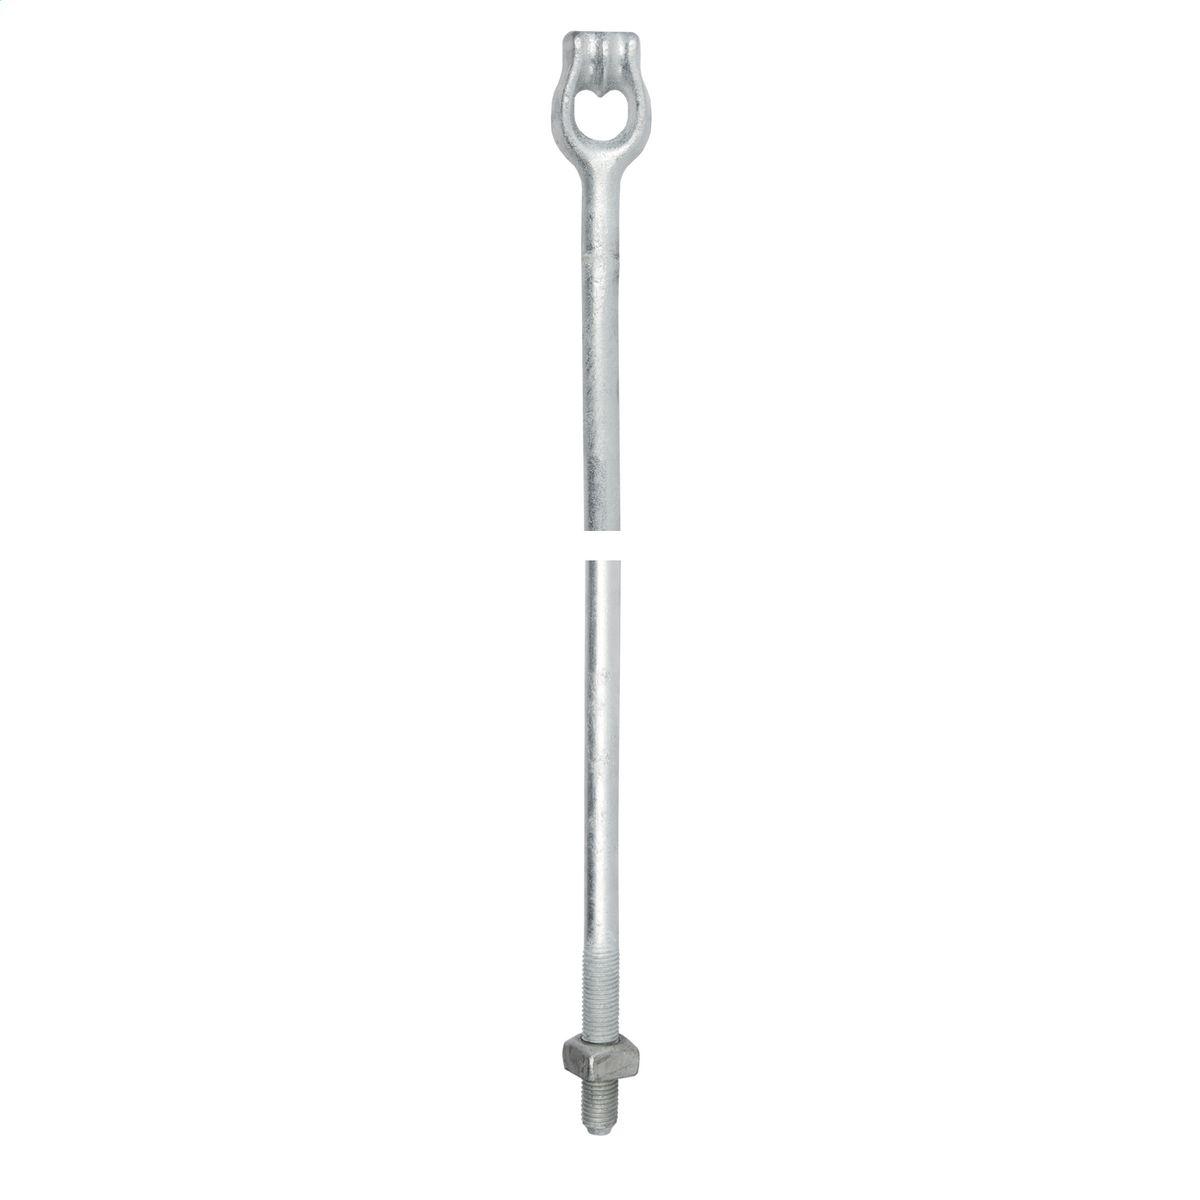 Hubbell 5368 Expanding/Cross-Plate Anchor Rod 1" (25.4 mm) Diameter Rod, 8' (2438 mm) long with Twineye.  ; Thimbleye®, Twineye® and Tripleye® drop forged eye distribute pulling stresses uniformly over individual strands of guy wire and keep the guy wire from spreadin